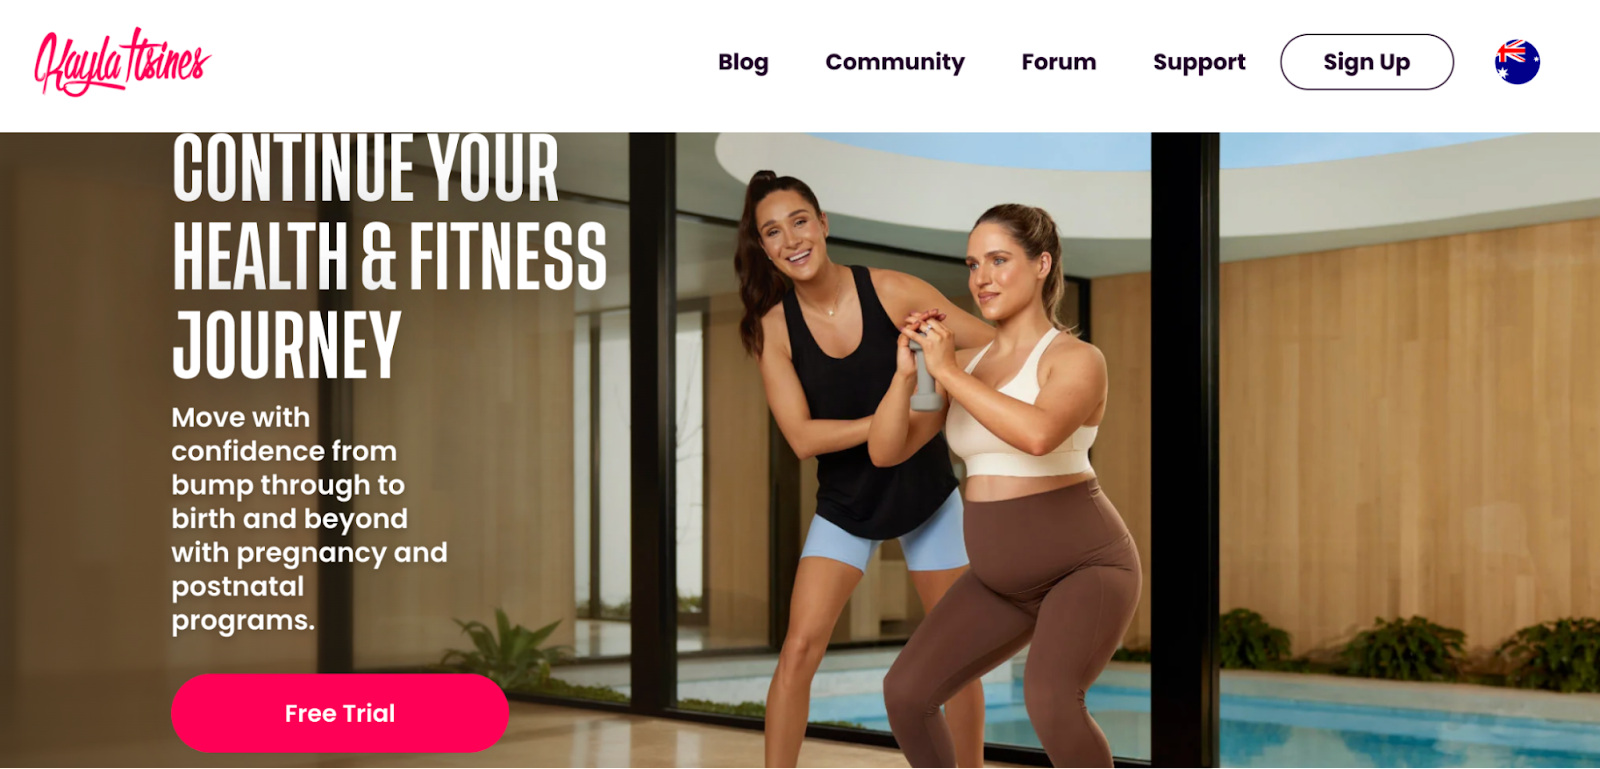 Kayla Itsines website homepage with free trial button and trainer smiling.